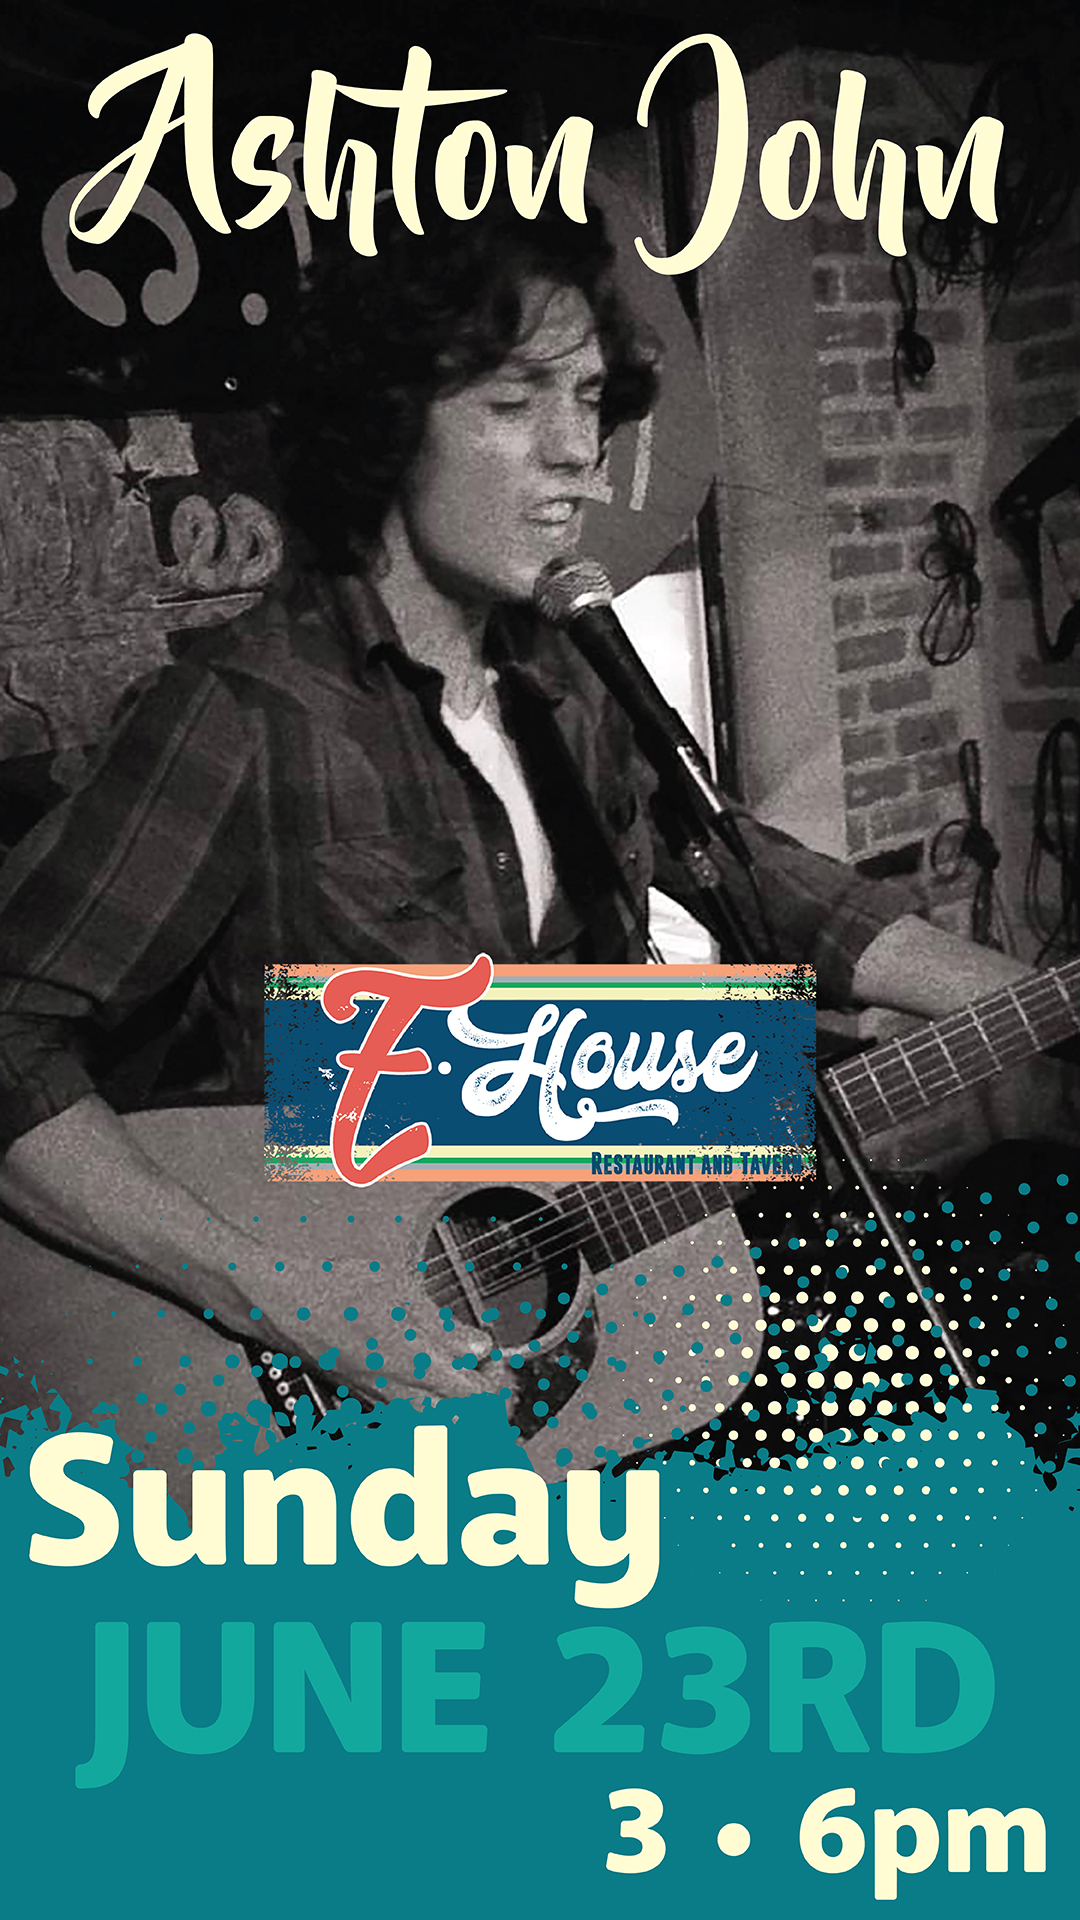 Black and white poster of Ashton John playing guitar, promoting a performance on Sunday, June 23rd at Z House Restaurant and Tavern at 3 to 6 pm.